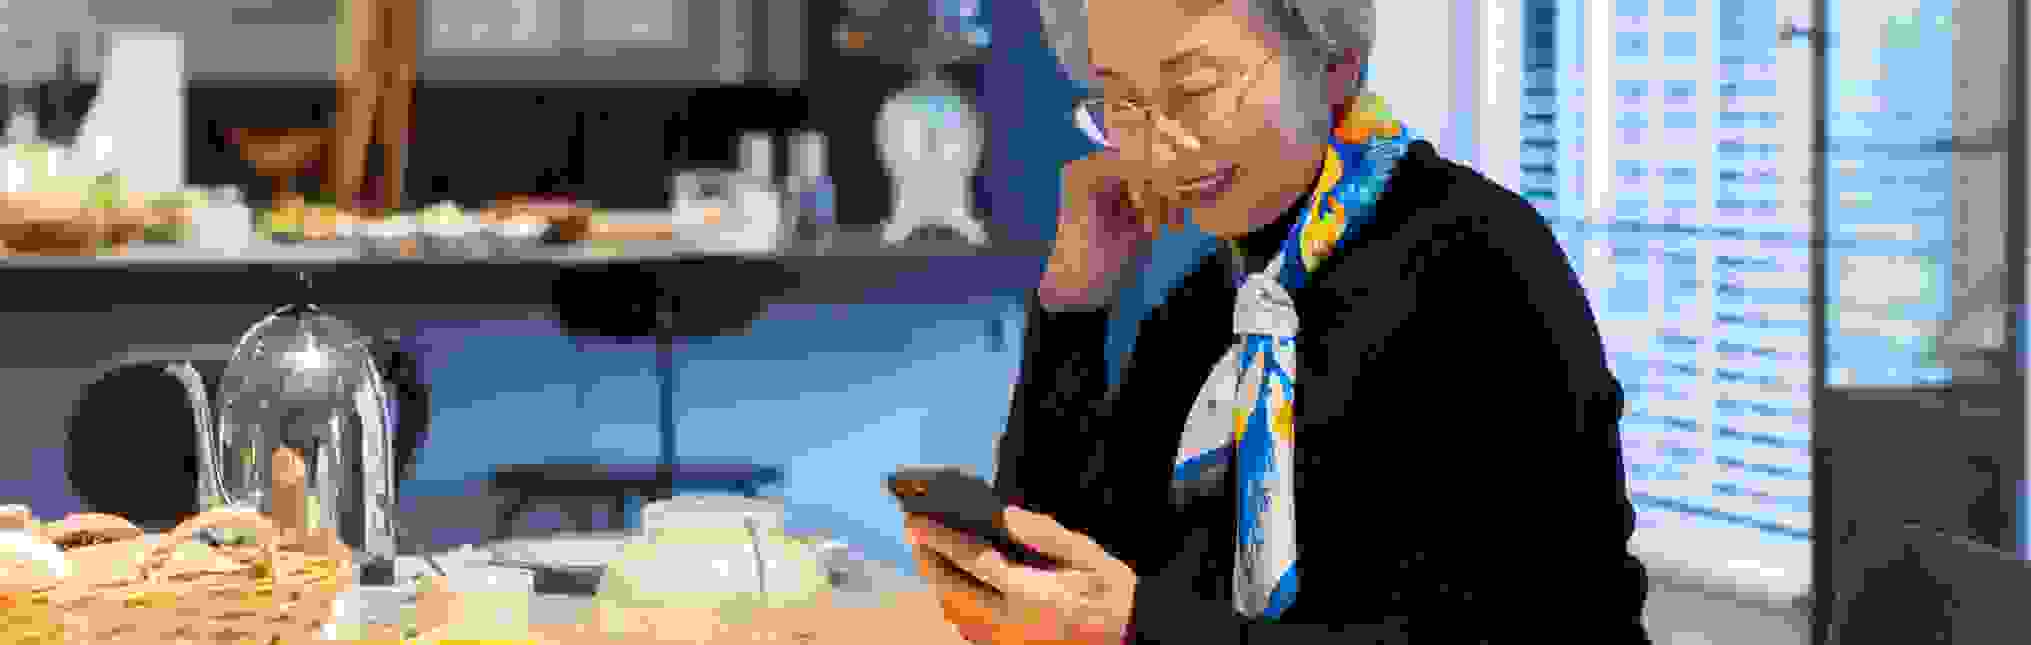 Senior woman operating a smartphone at a cafe